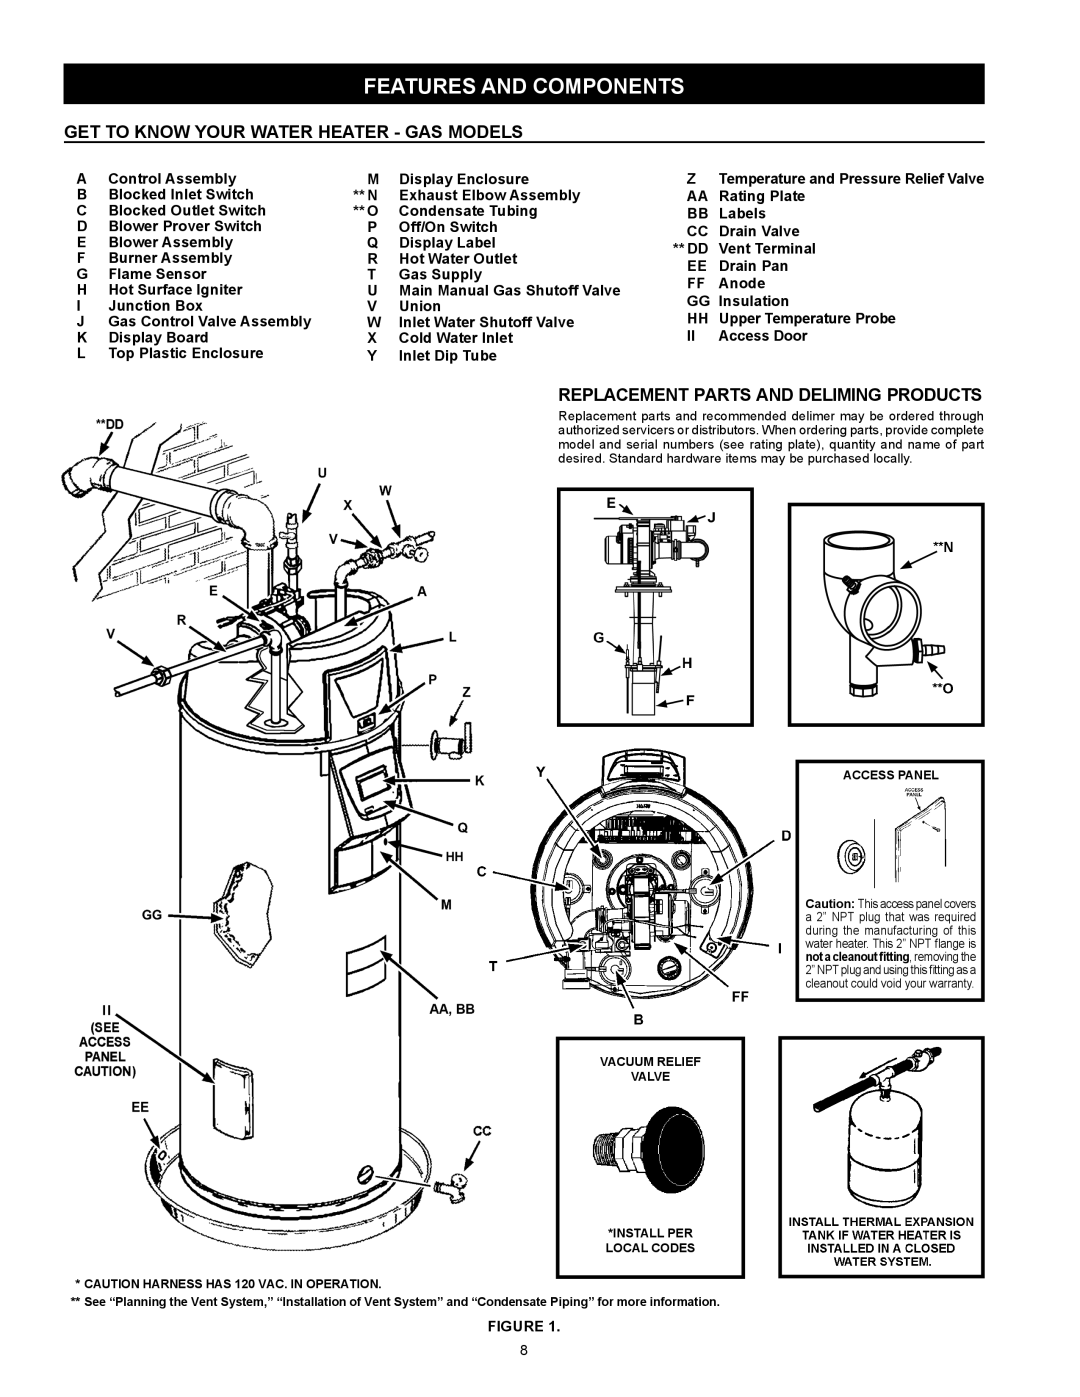 American Water Heater VG6250T100 features and components, Get To Know Your Water Heater - Gas Models, Control Assembly 